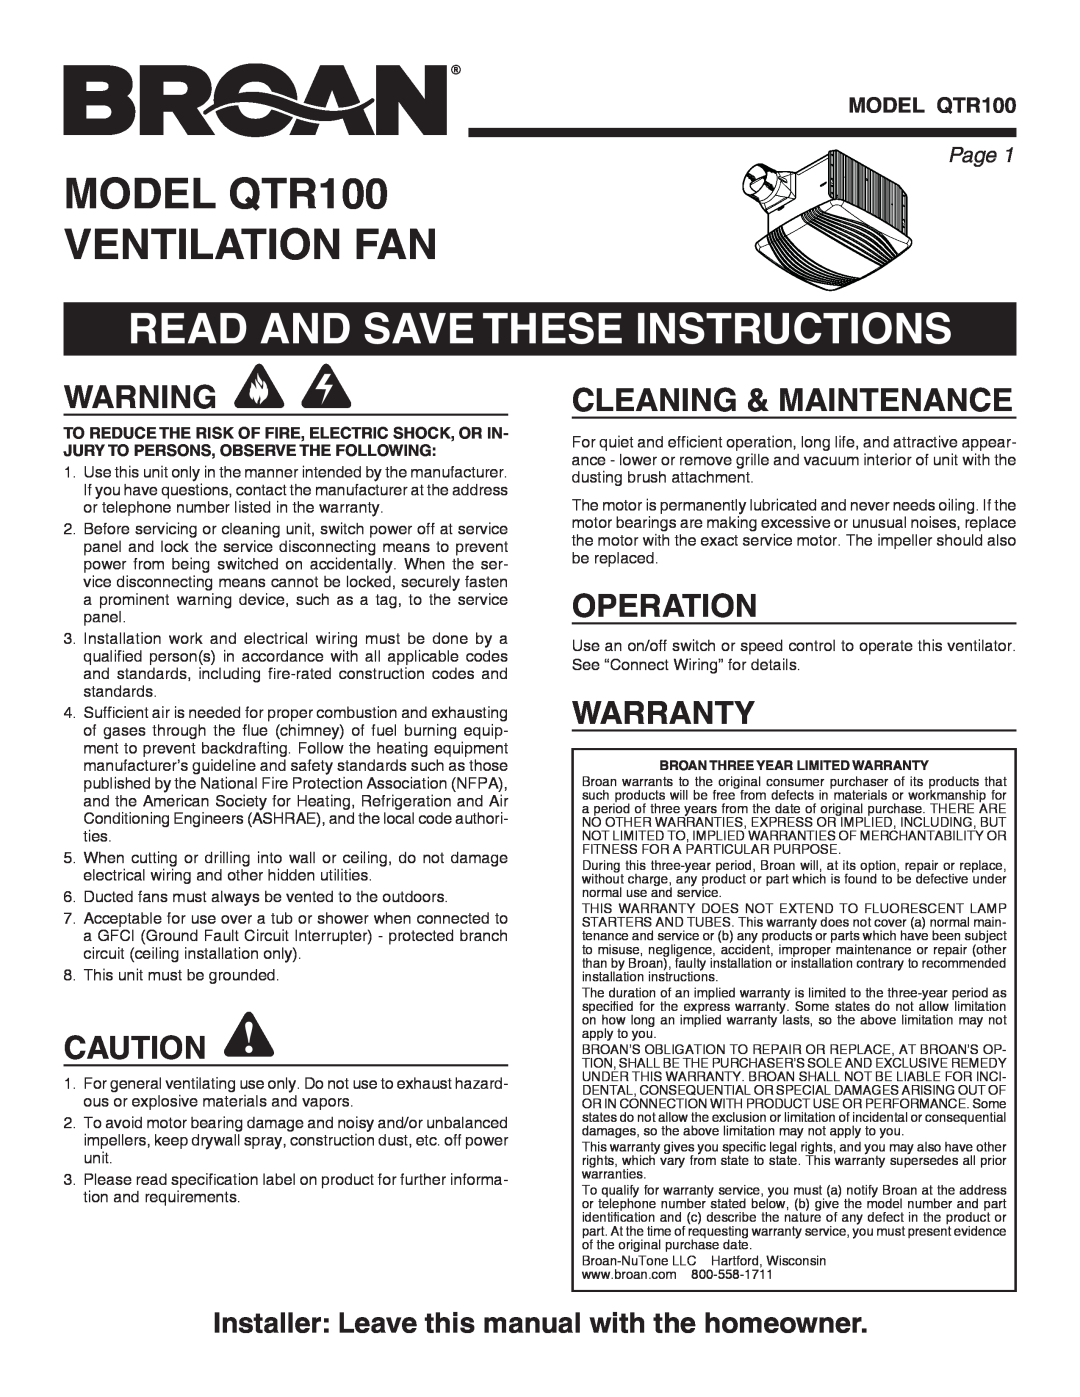 Broan warranty MODEL QTR100 VENTILATION FAN, Read And Save These Instructions, Cleaning & Maintenance, Operation 